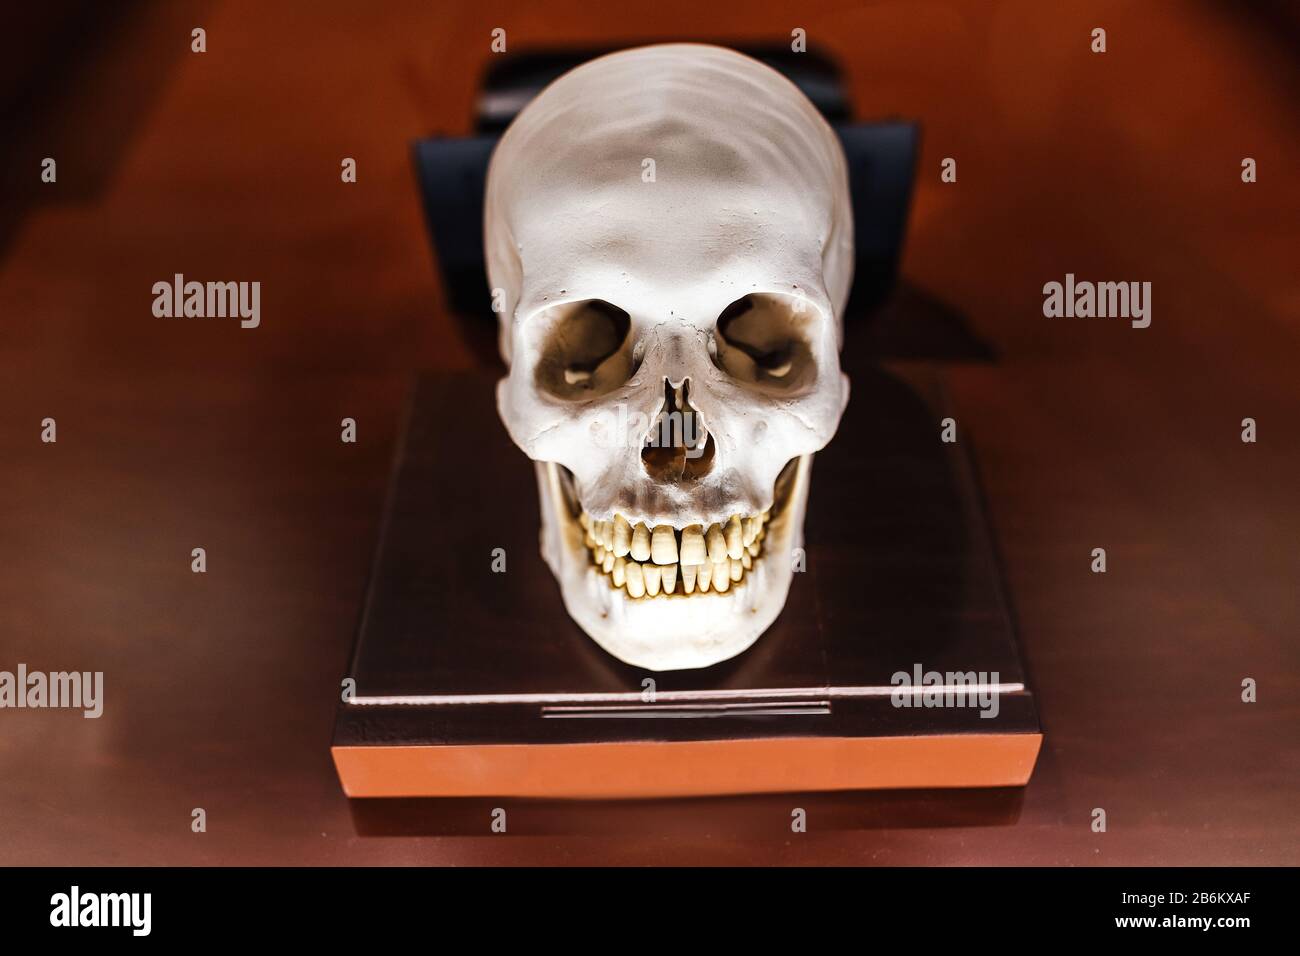 anatomical homo sapiens scarry himan skull model on the table Stock Photo